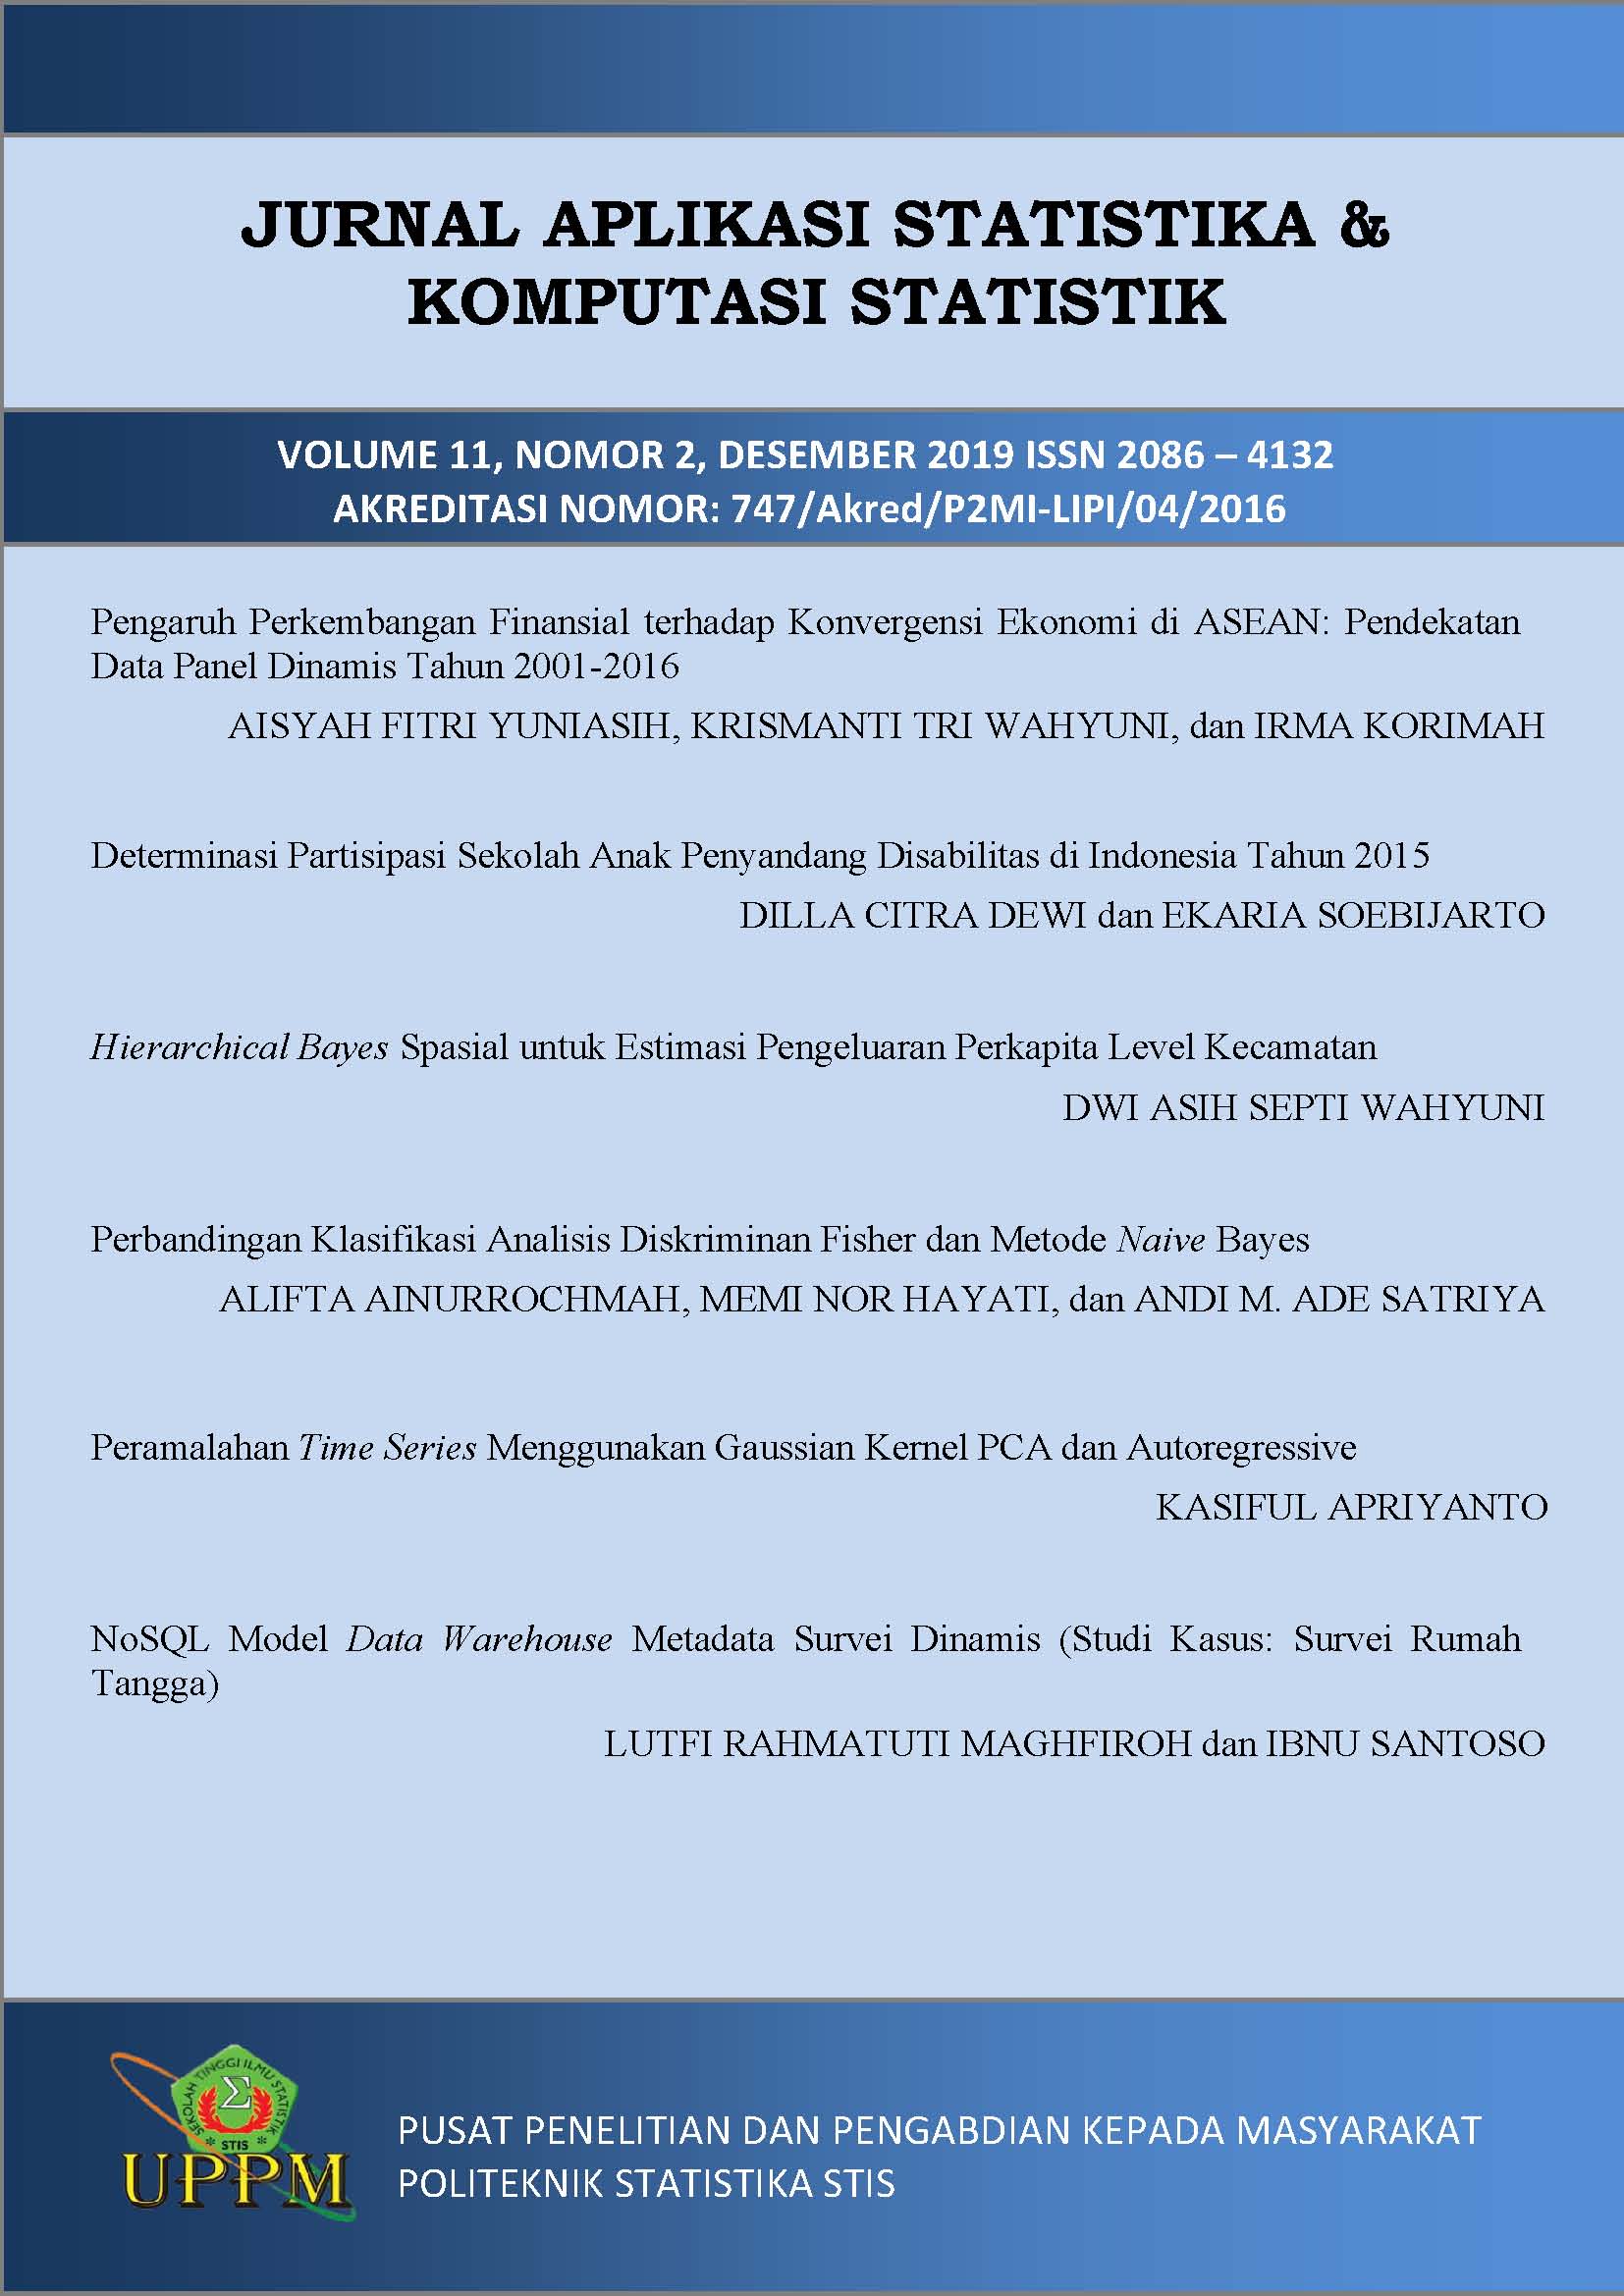 					View Vol. 11 No. 2 (2019): Journal of Statistical Application and Computational Statistics
				